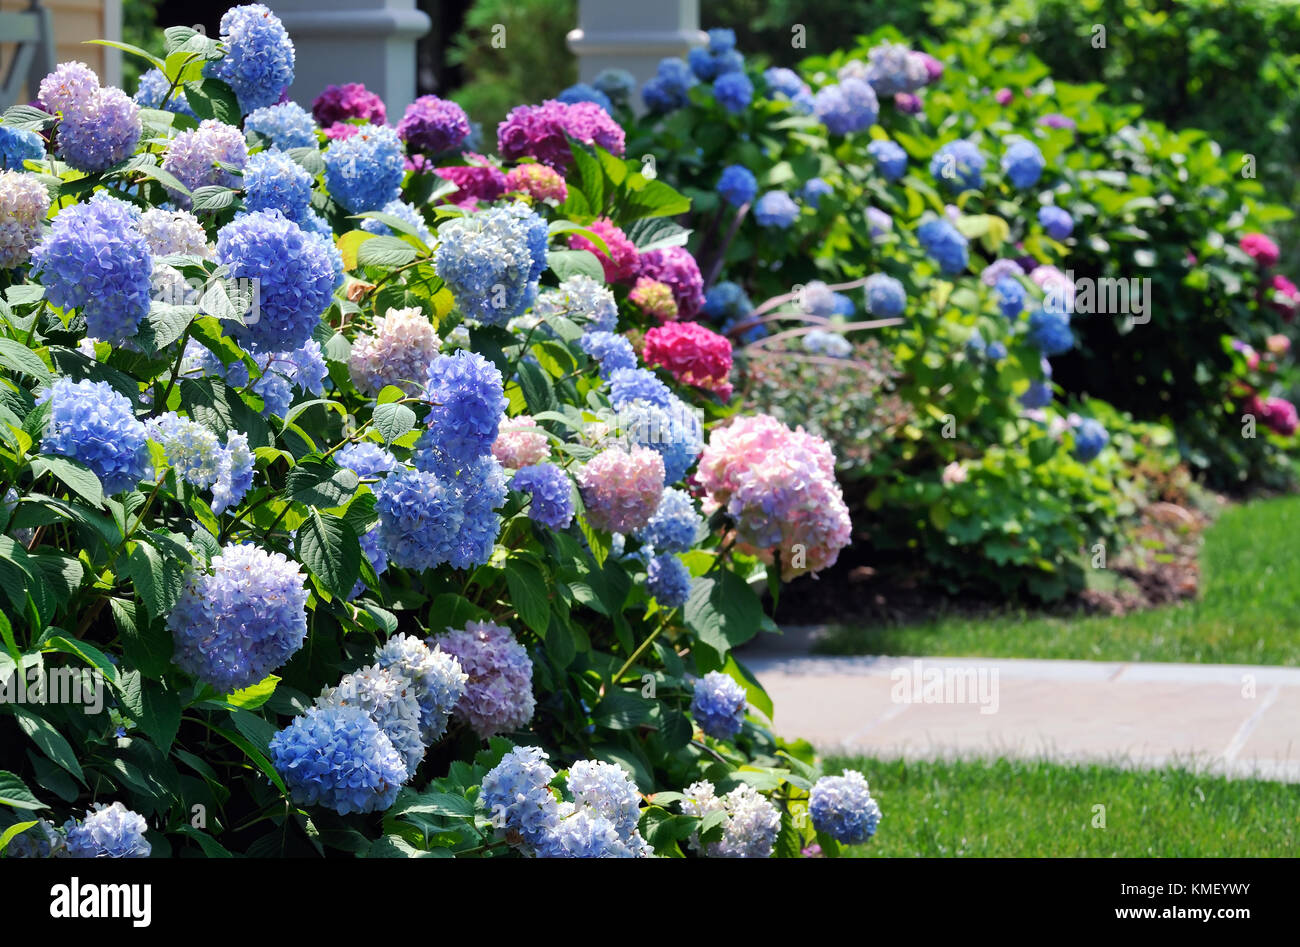 Colorful hydrangeas framing house entrance. Mass planting of blue, pink, light and dark purple flowers in ornamental garden. Stock Photo